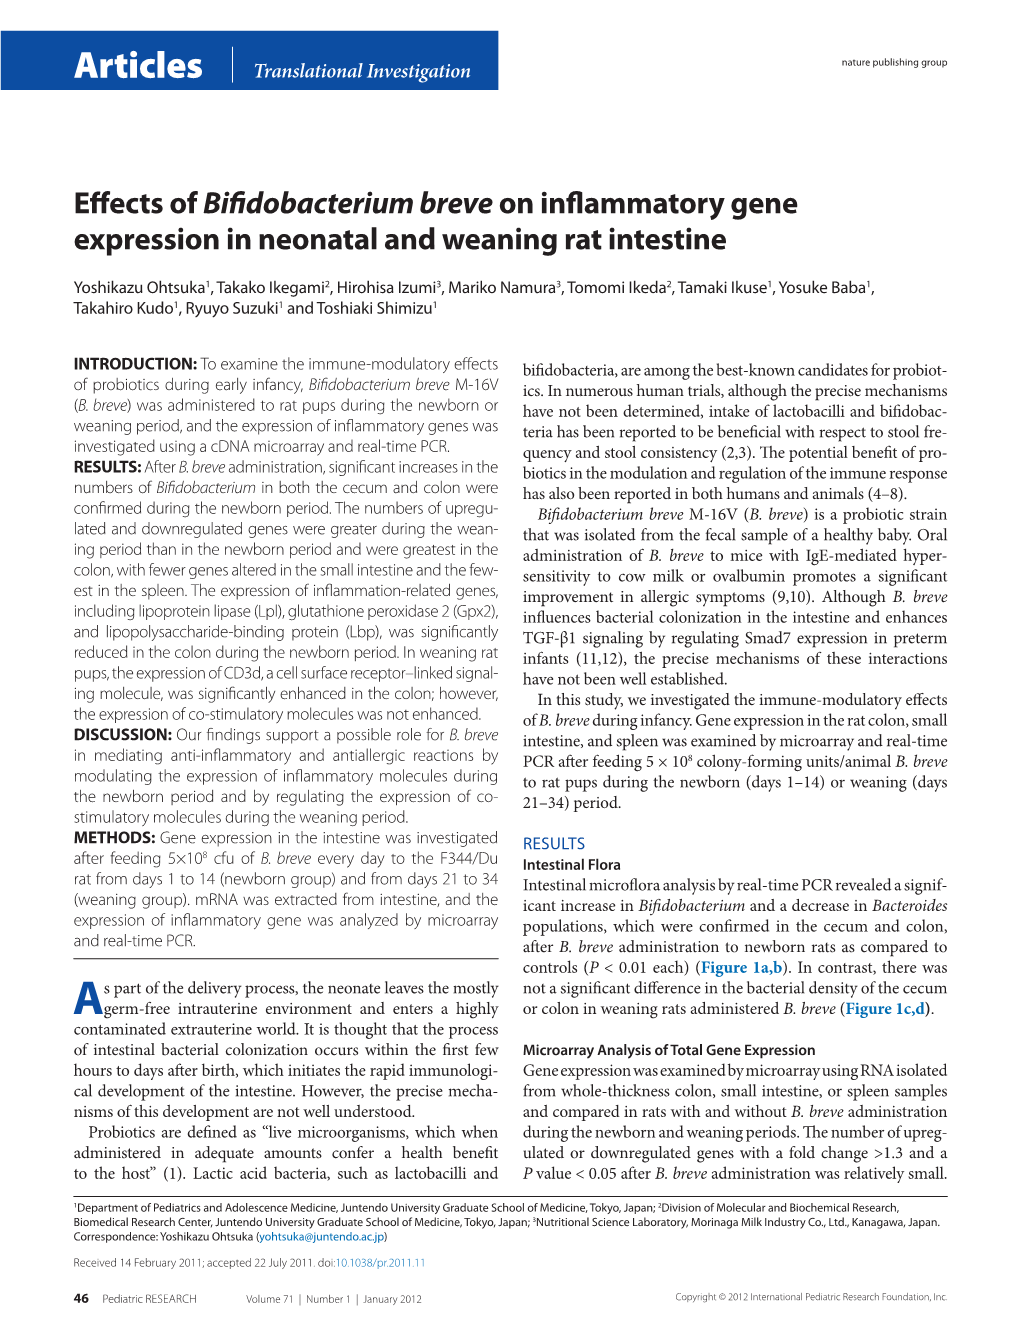 Effects of Bifidobacterium Breve on Inflammatory Gene Expression In